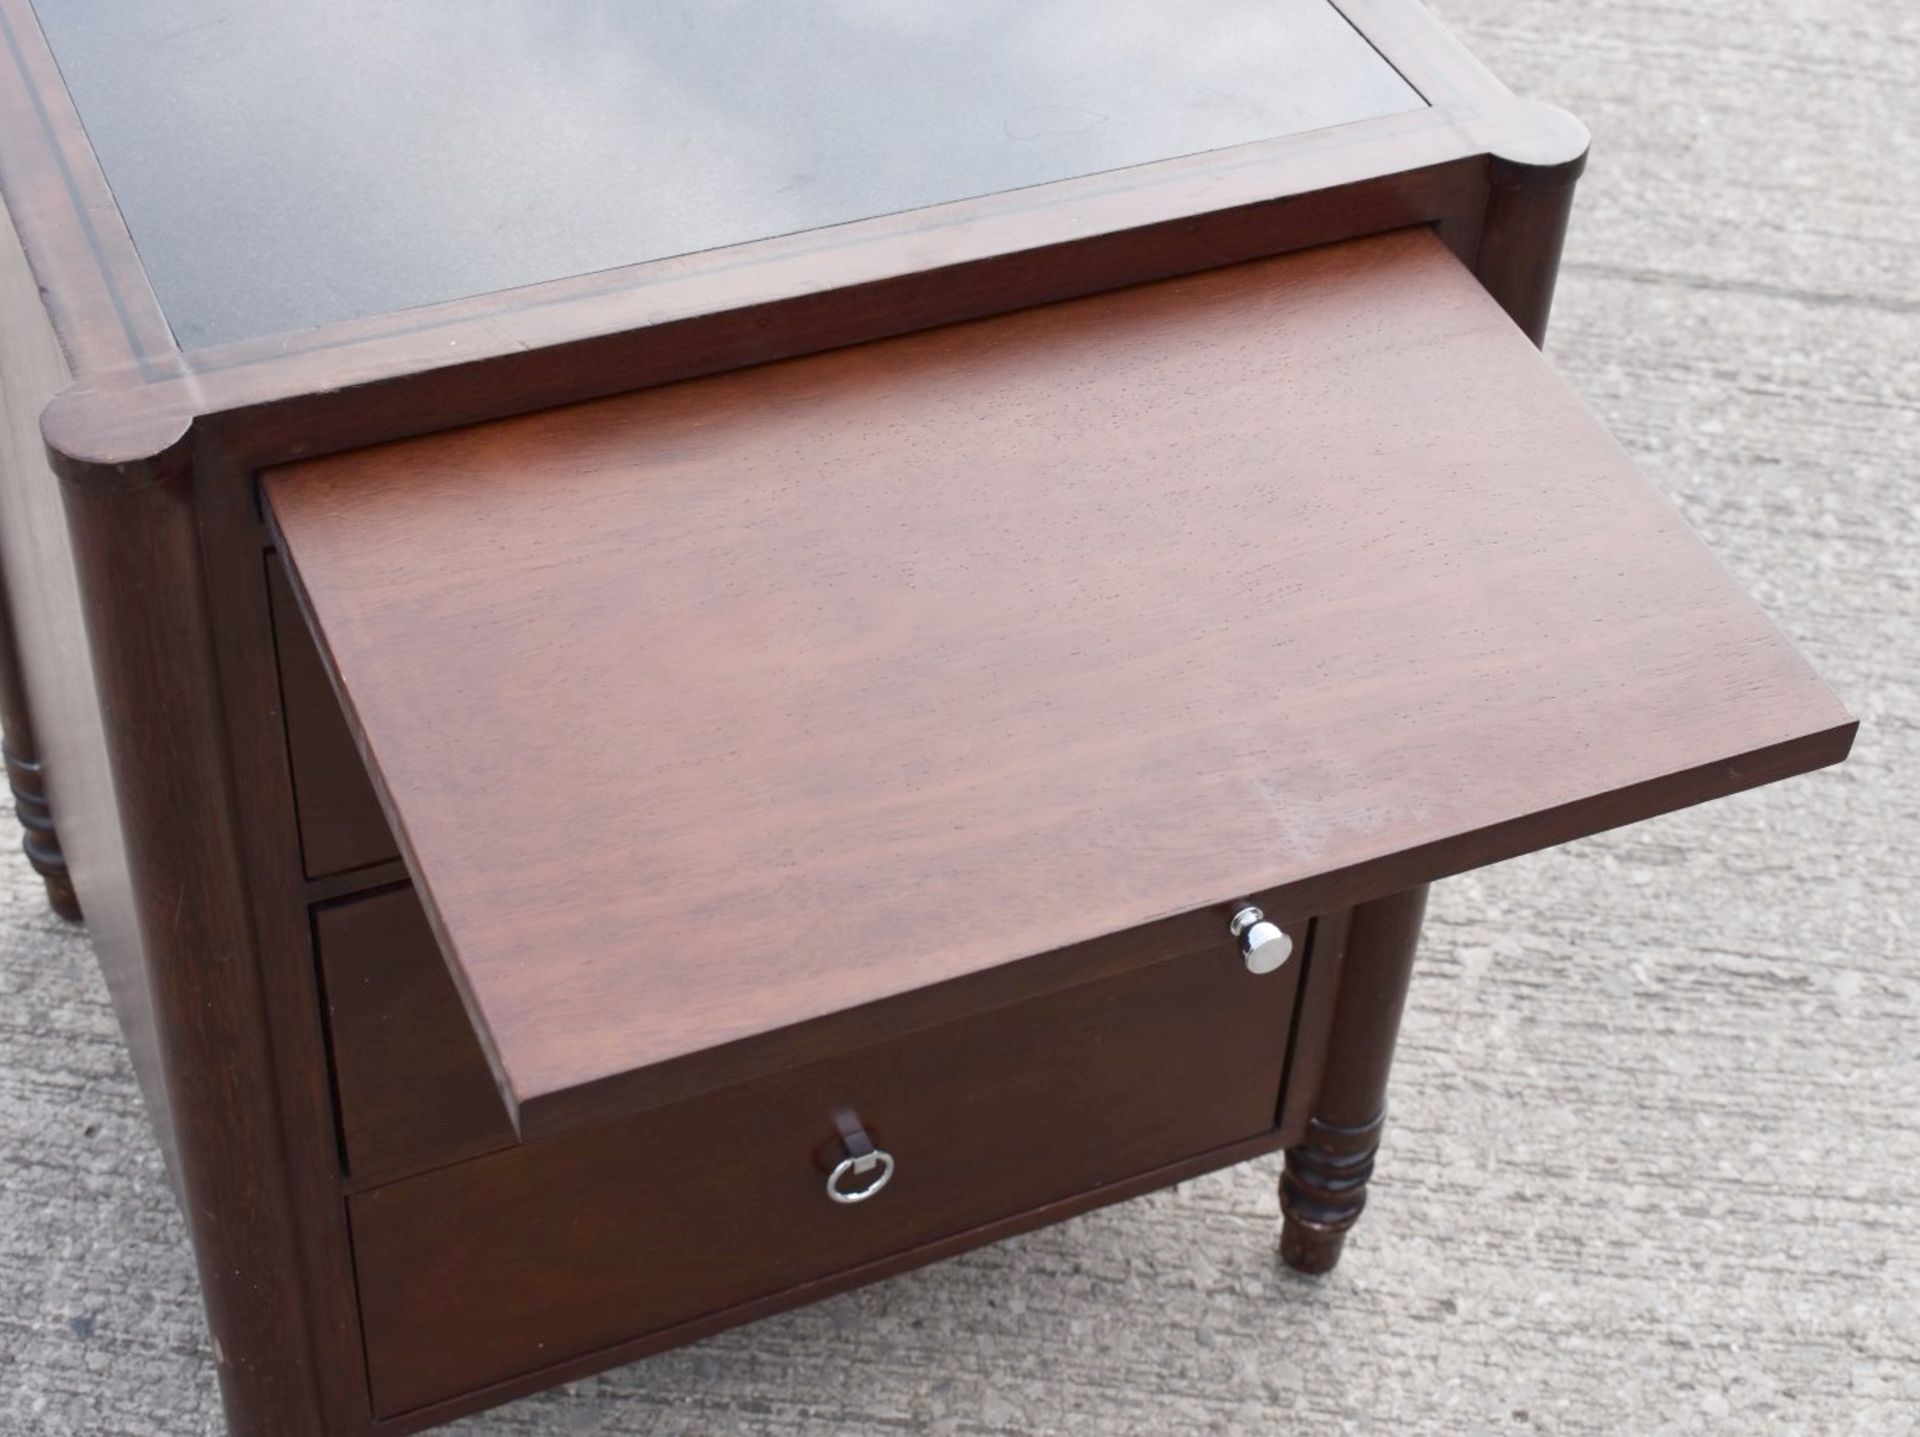 1 x CHANNELS Classically Styled Designer Solid Wood End Table with Pull-Out Tray, 1-Drawer Storage - Image 3 of 5